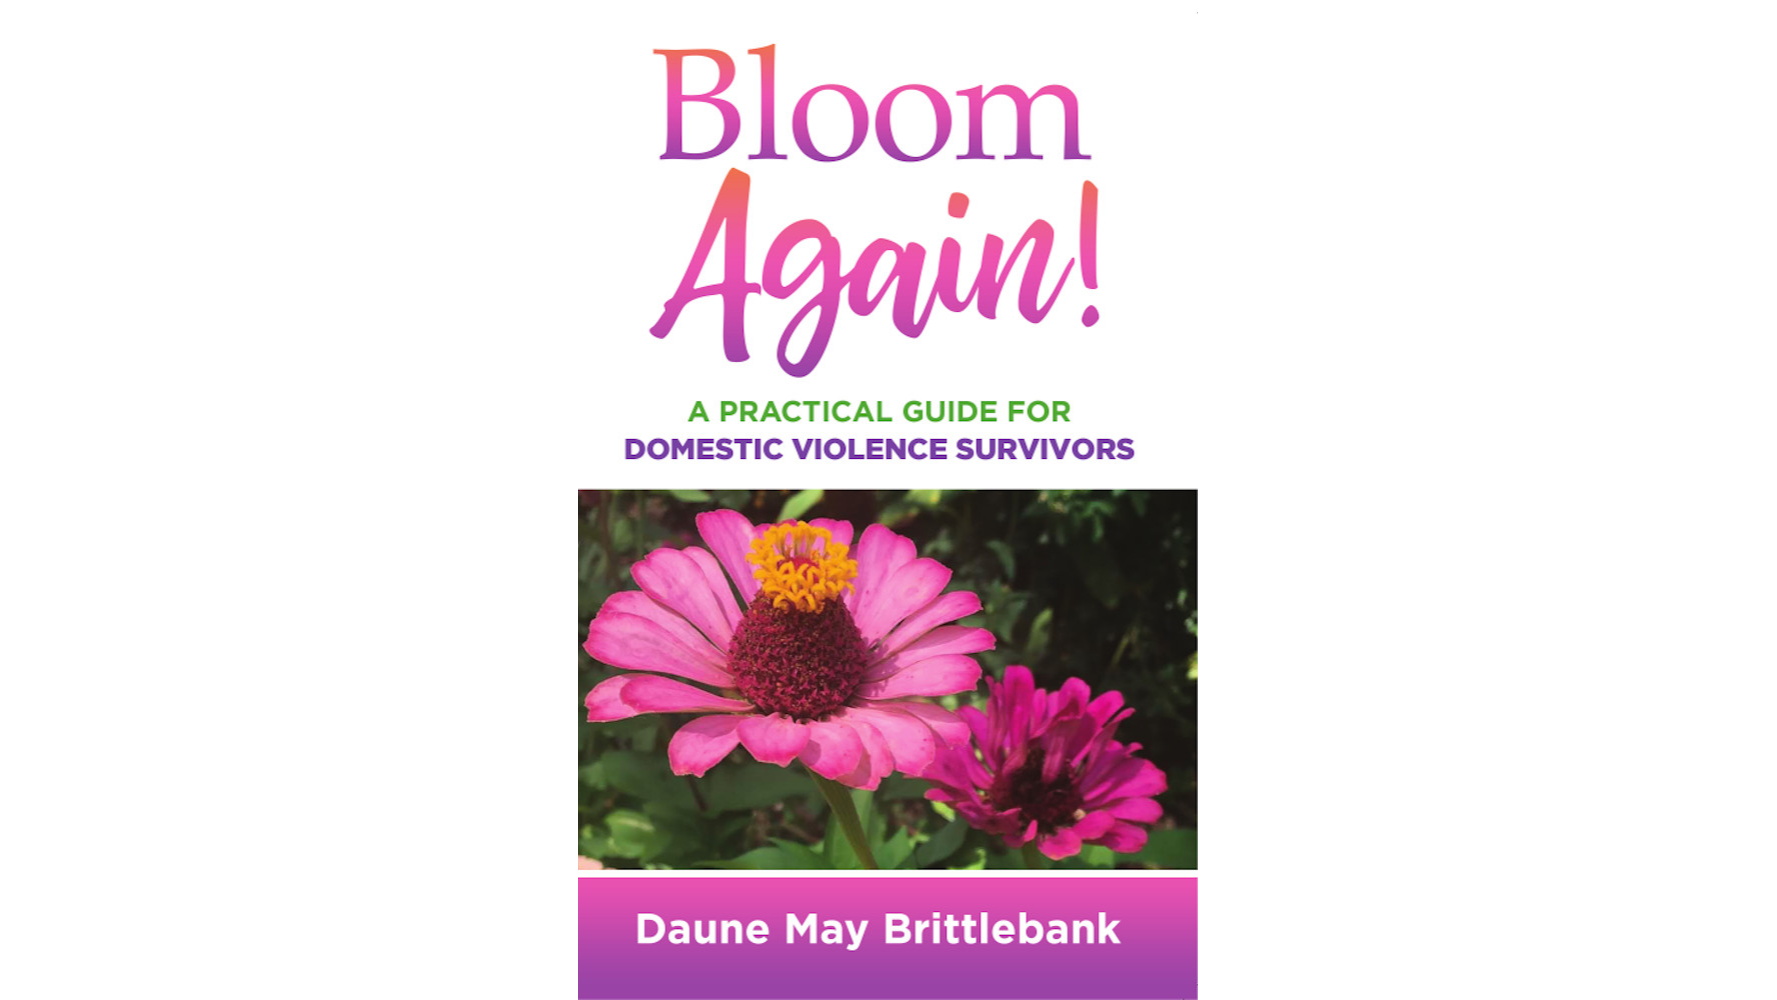 Photo for Bloom Again! A Practical Guide for Domestic Violence Survivors on ViewStub